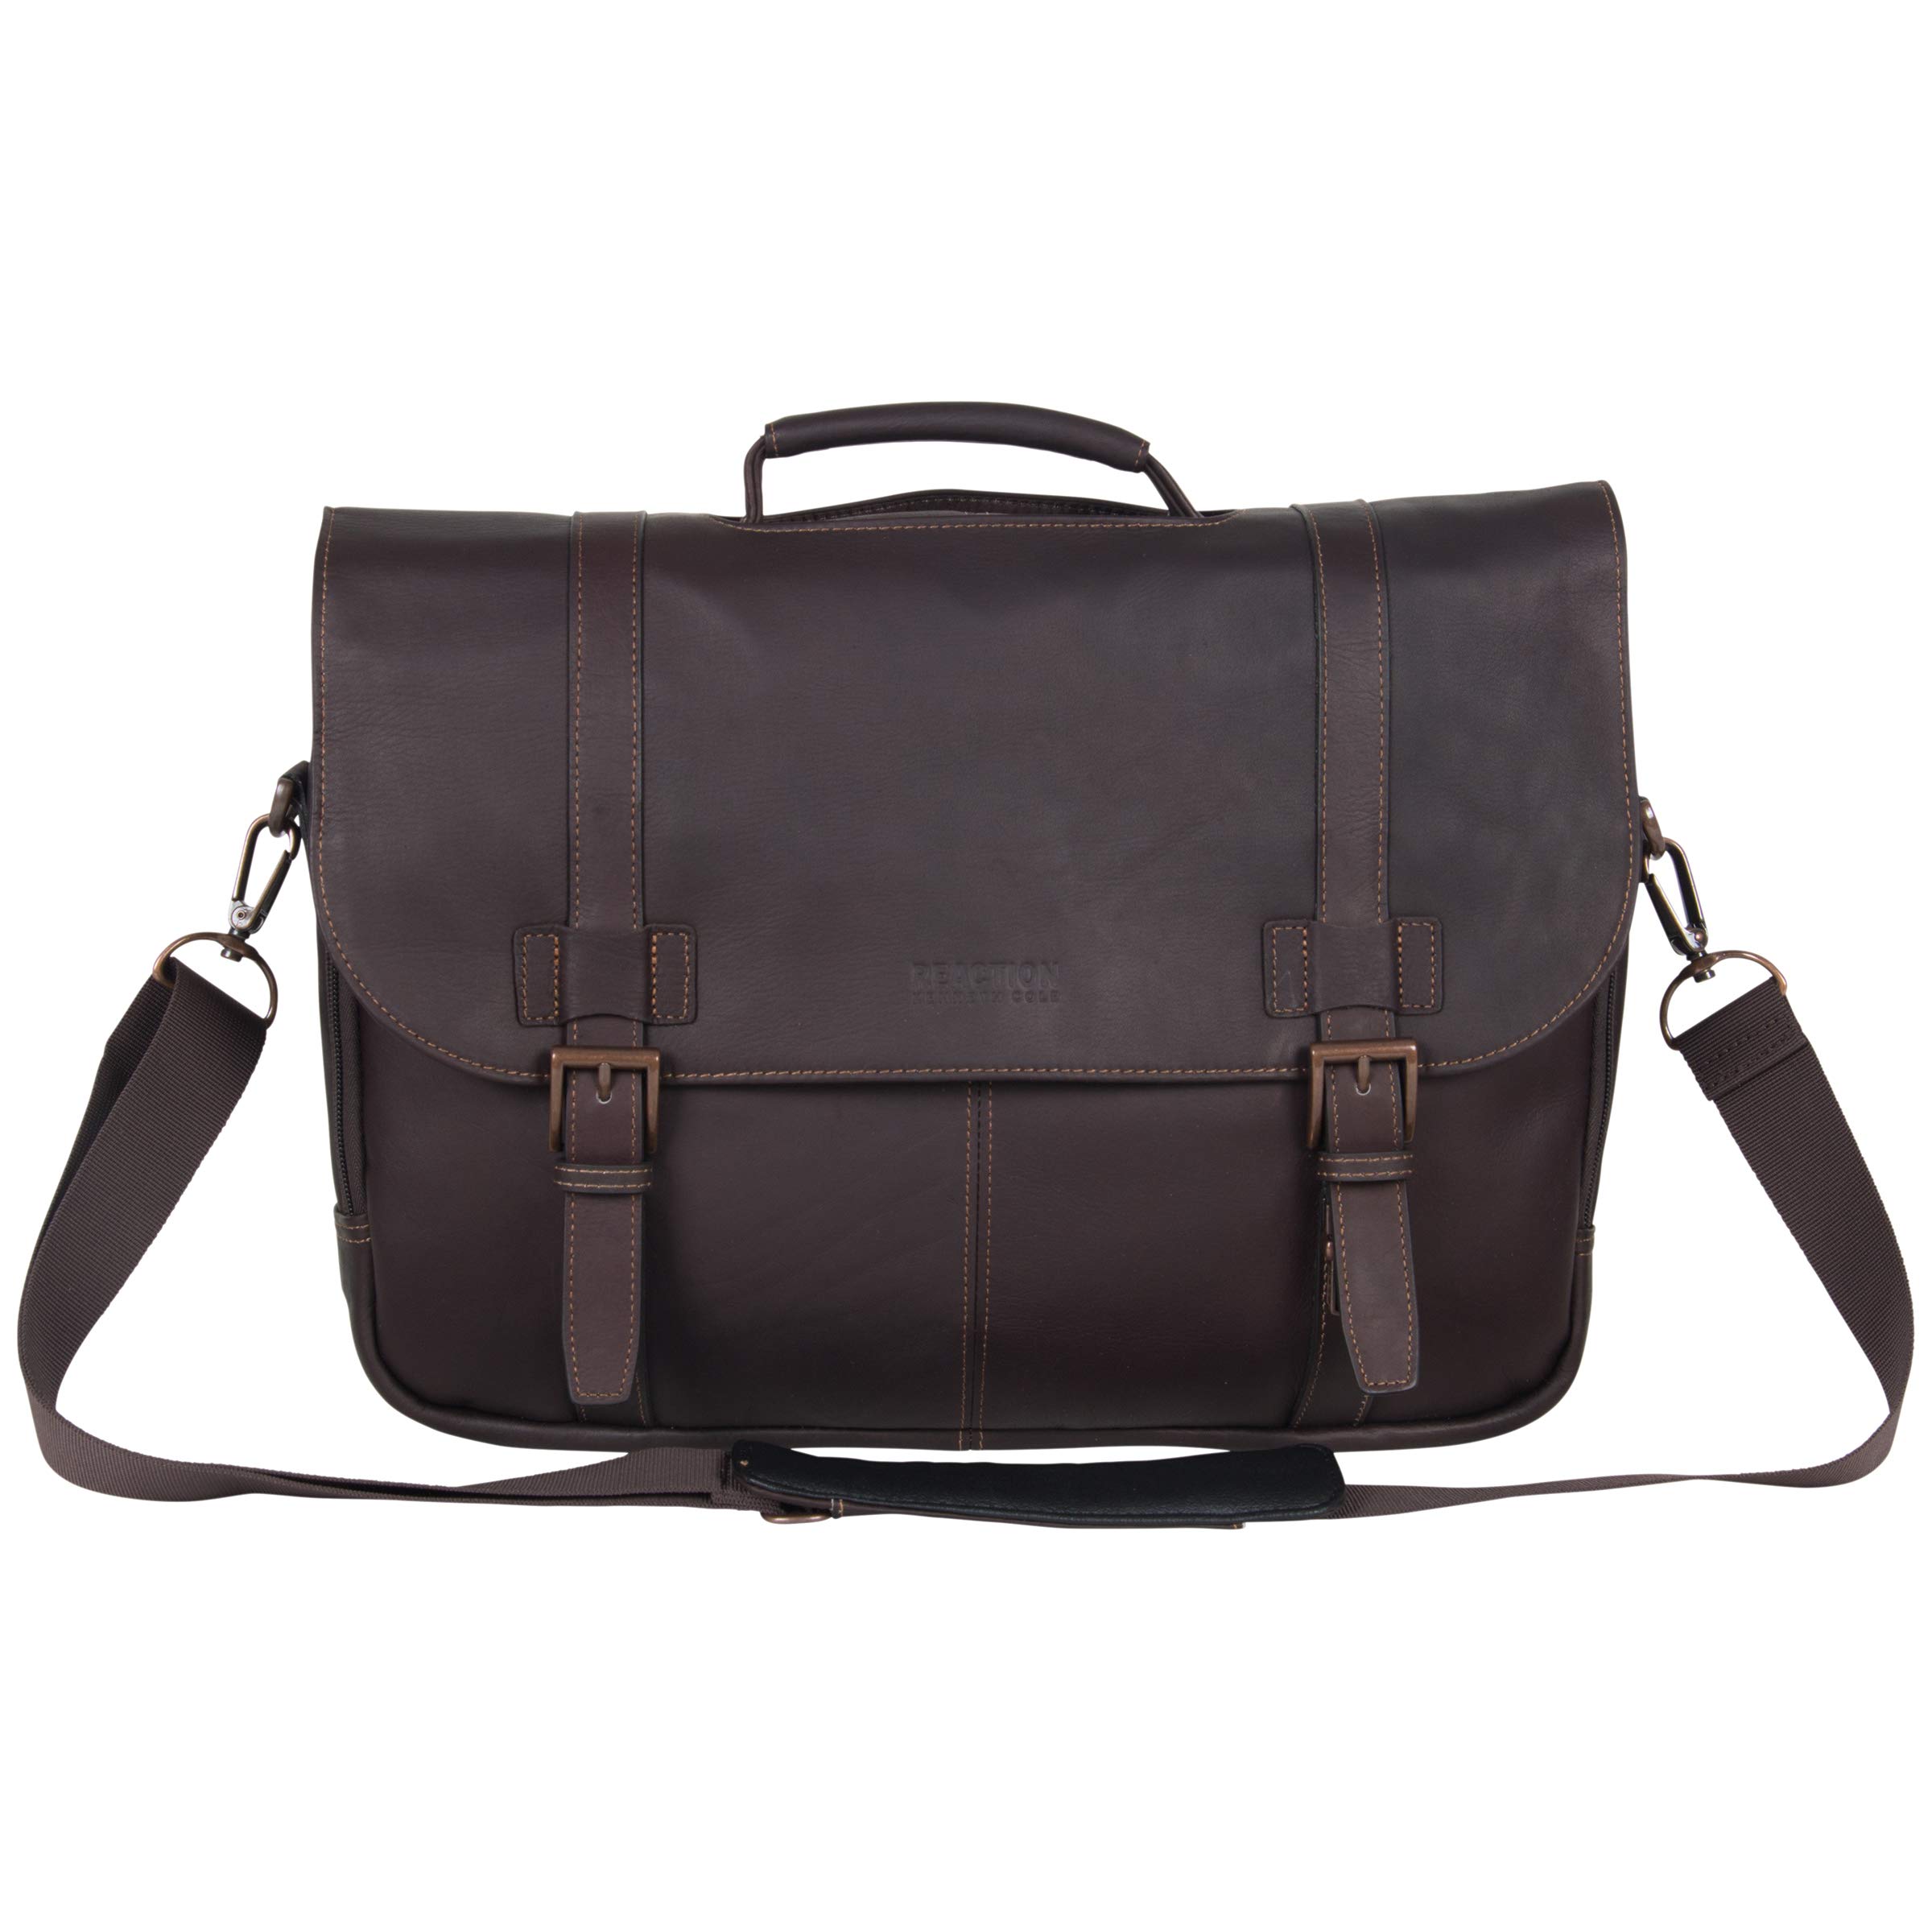 KENNETH COLE REACTION Show Business Messenger Briefcase Colombian Leather 16” Laptop Computer Portfolio Satchel Work Bag, Includes Card Holders, Dark Brown, One Size